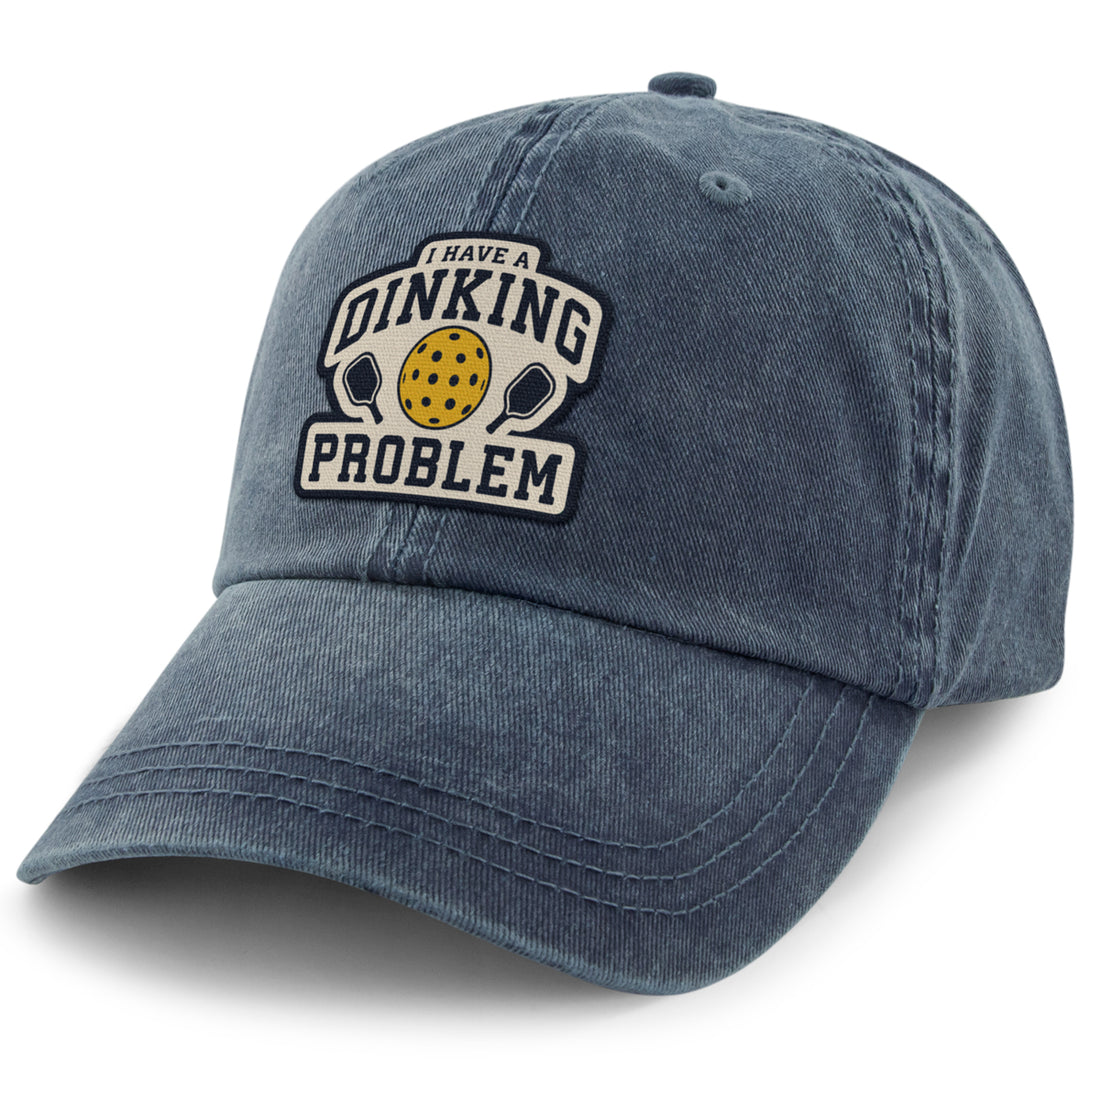 I Have a Dinking Problem Washed Dad Hat - Chowdaheadz